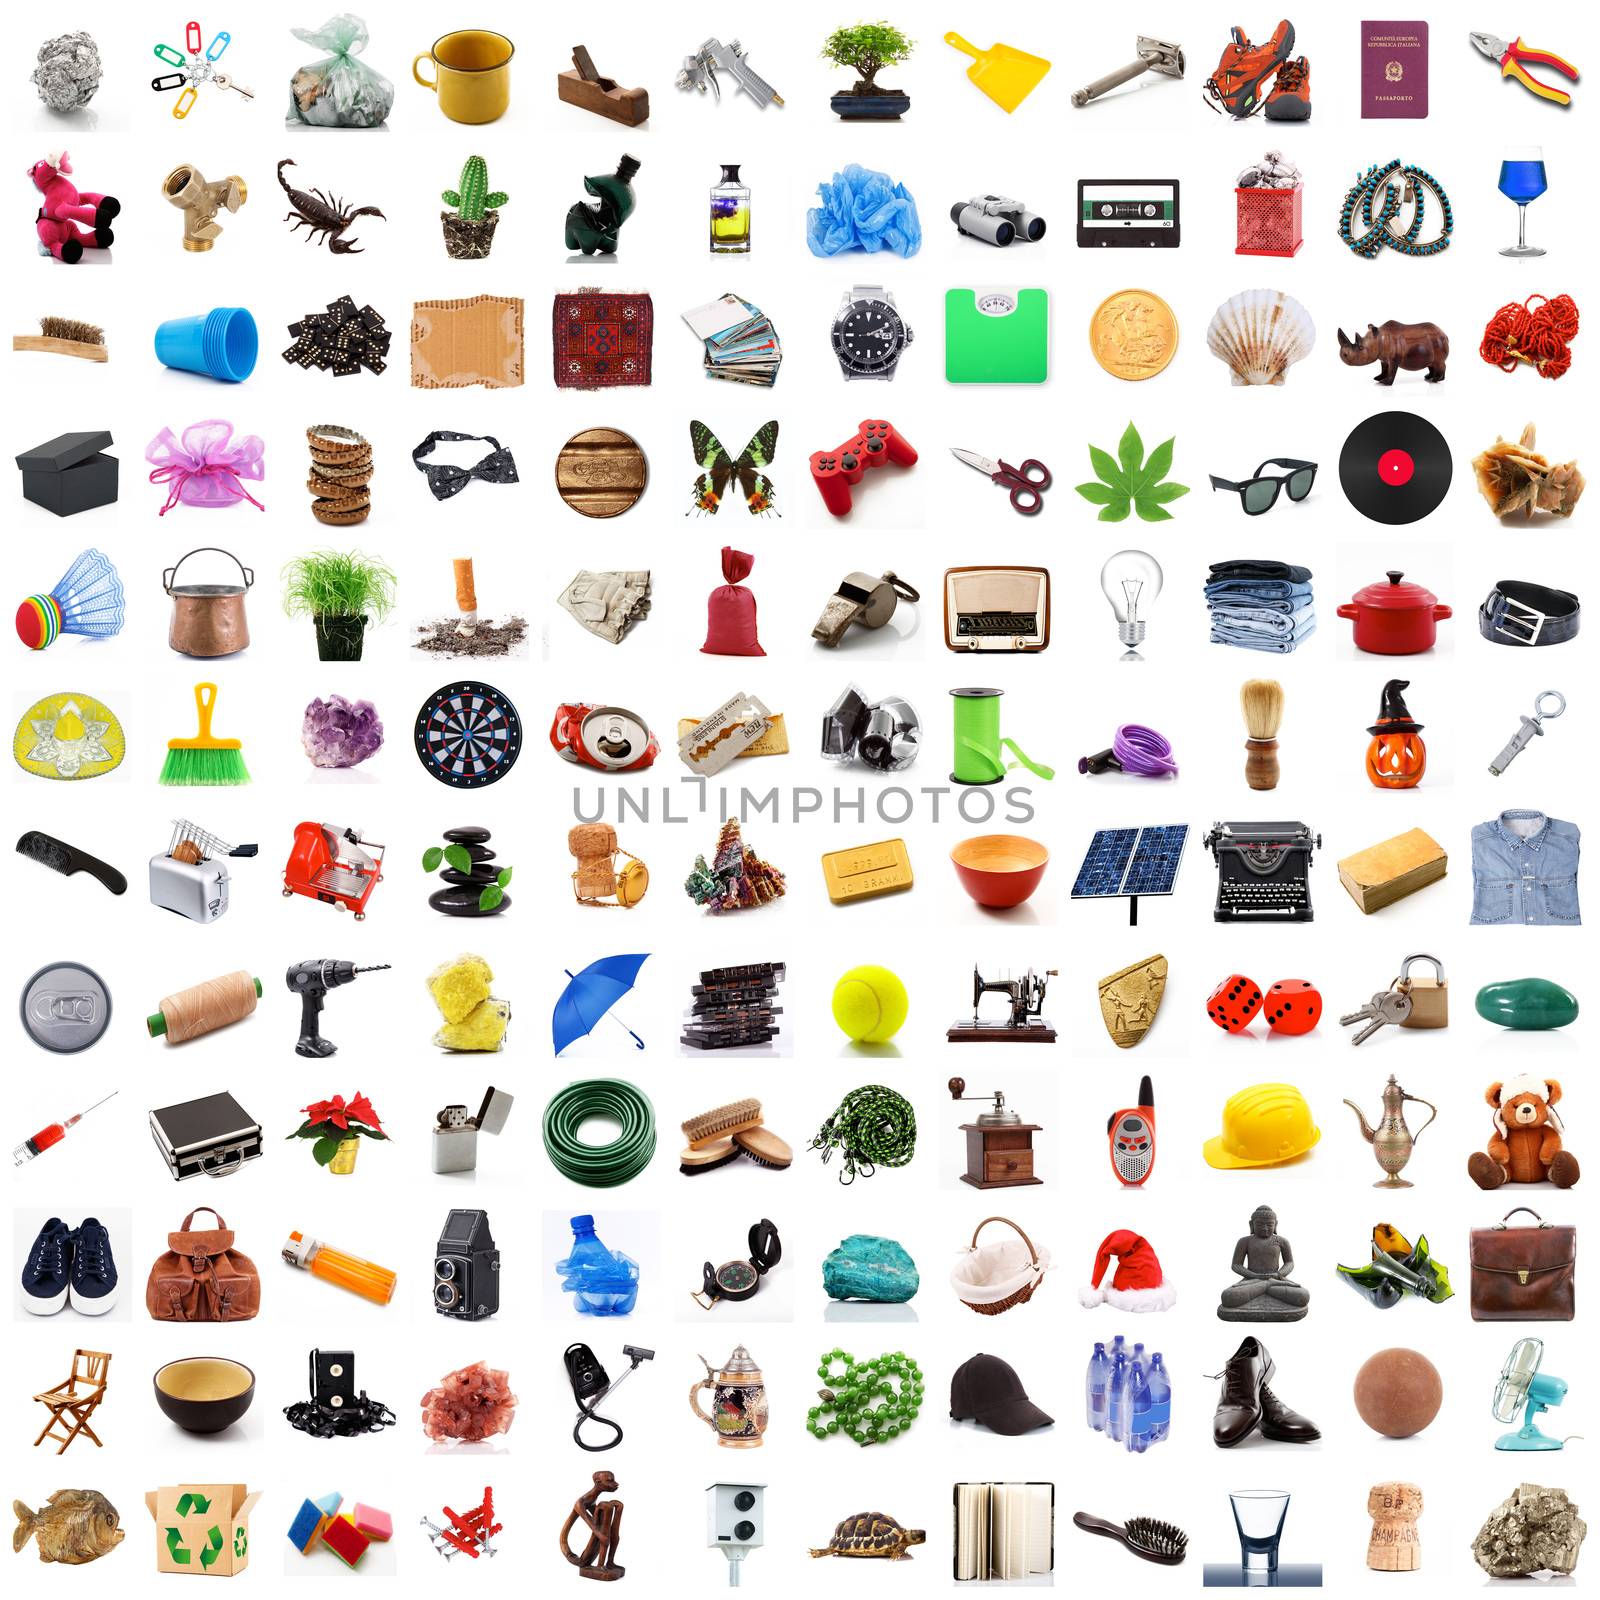 Collection of objects in chaos on white background